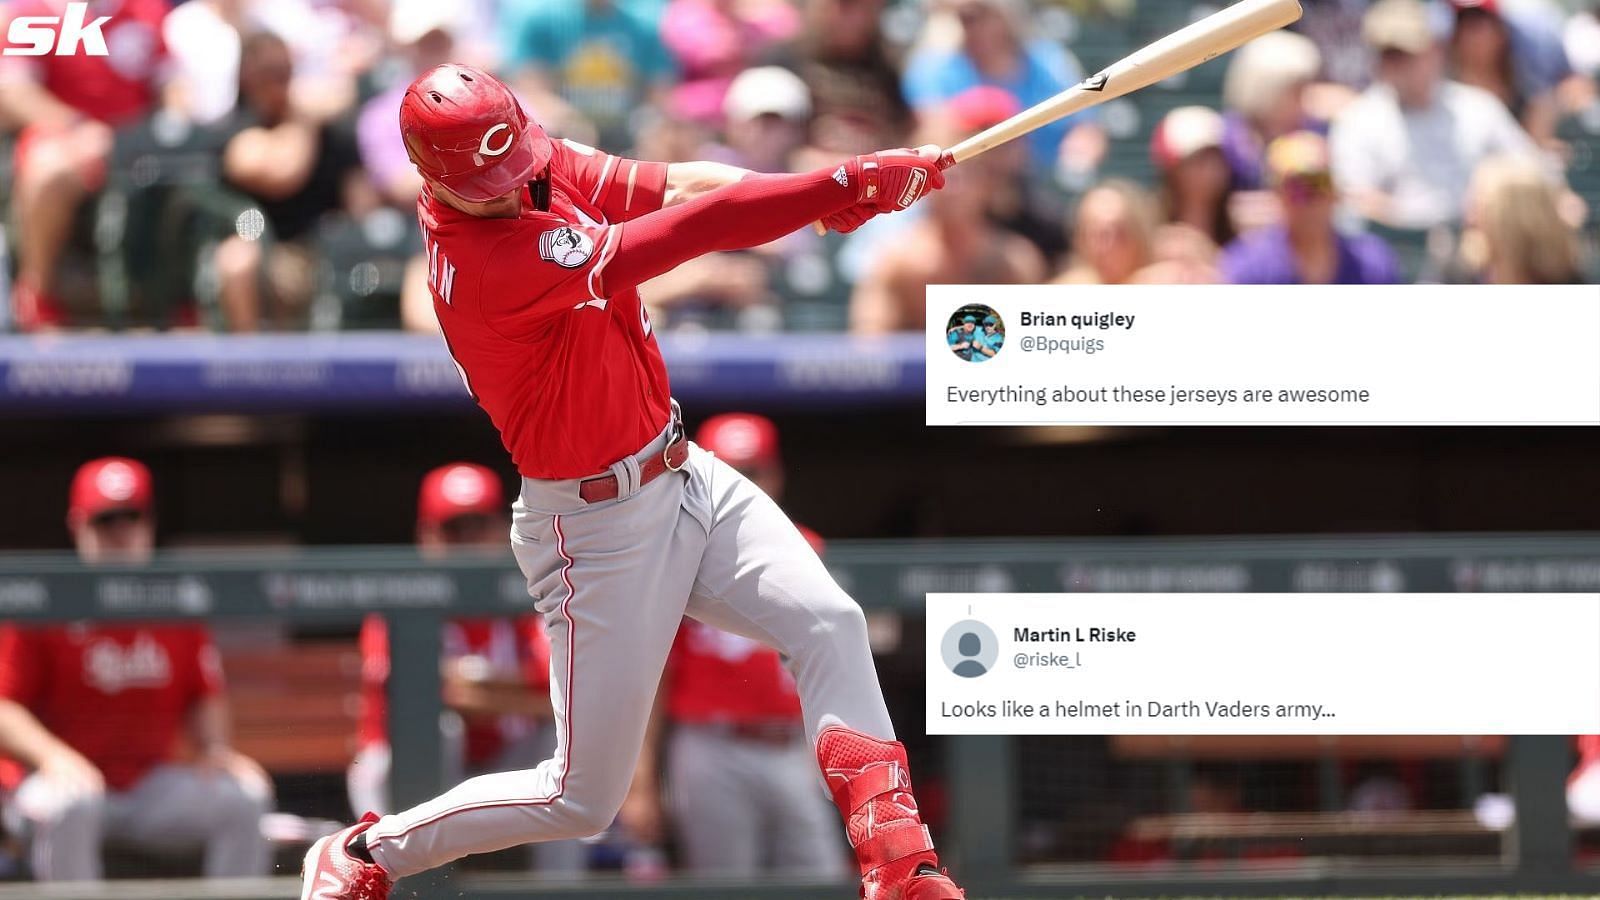 The Internet Reacts to the Reds' New Uniforms Unveiled Over the